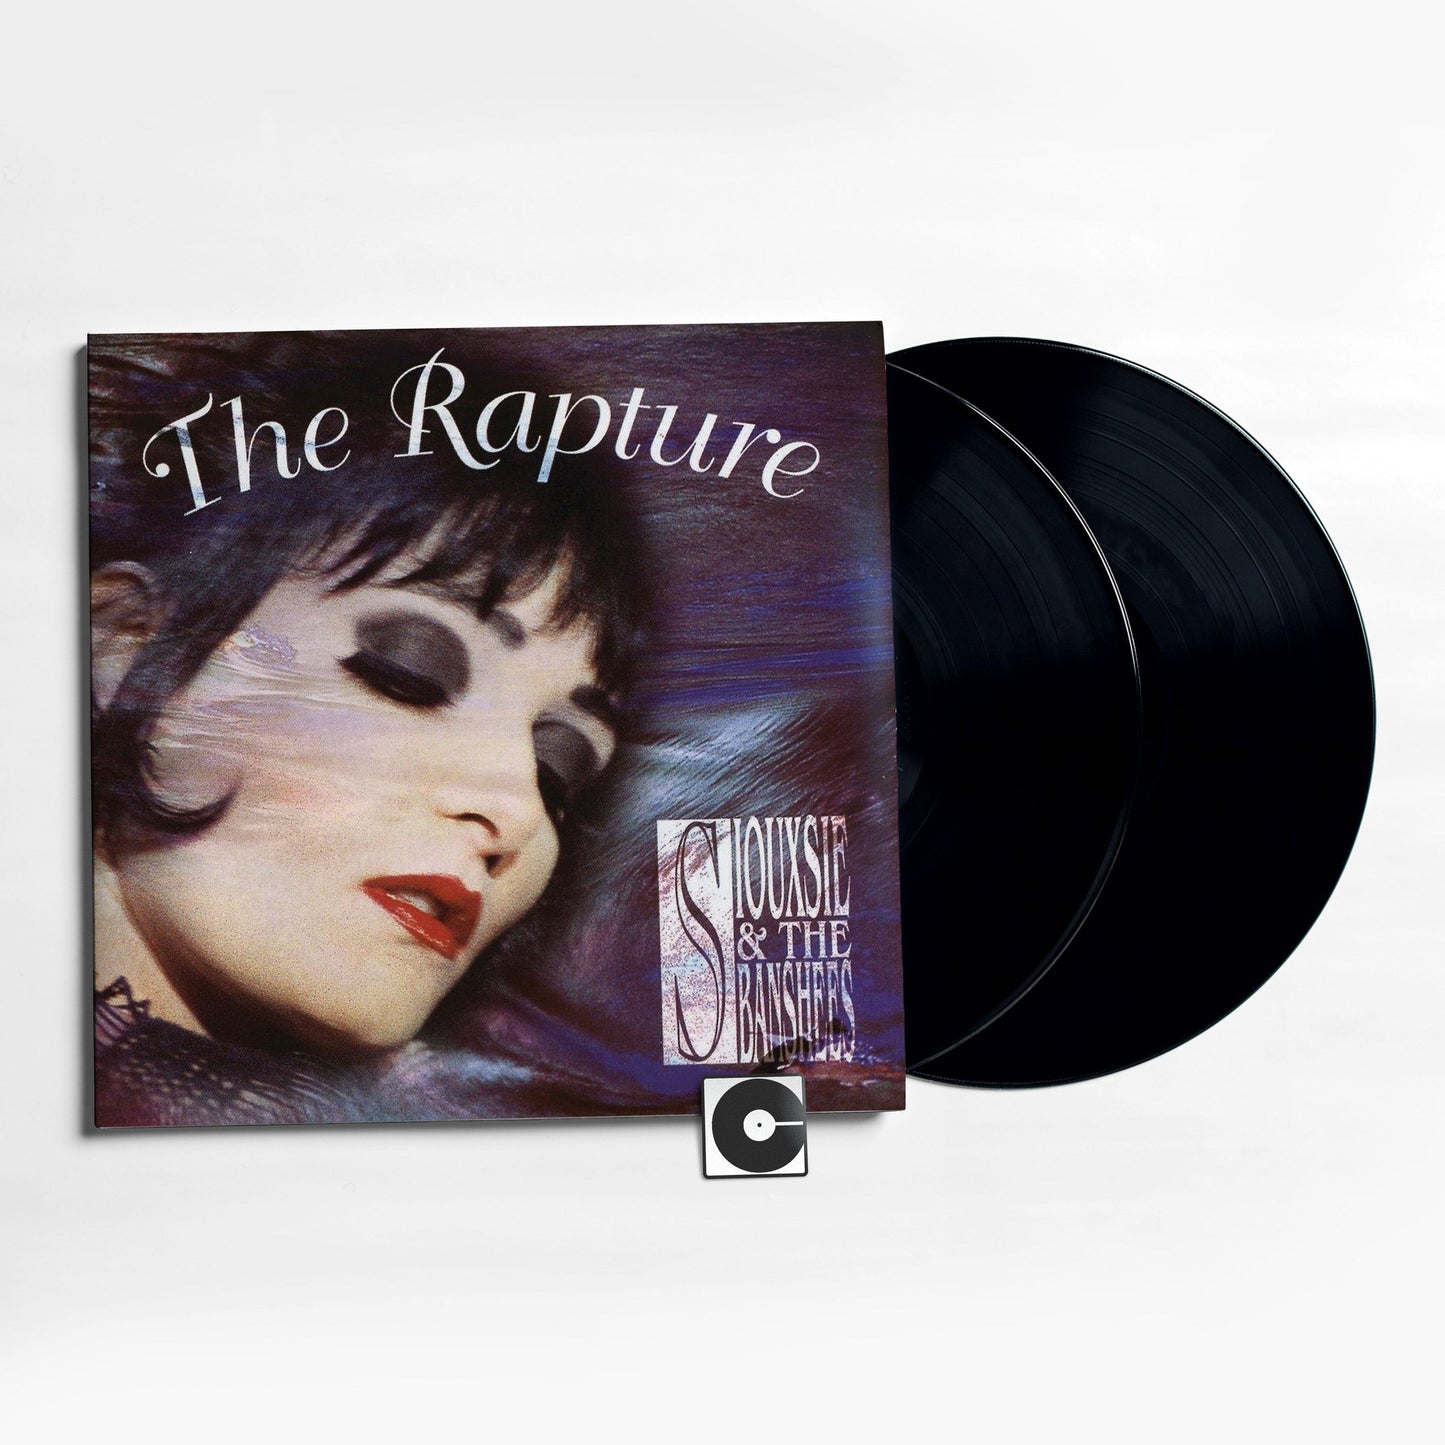 Siouxsie And The Banshees - "The Rapture"